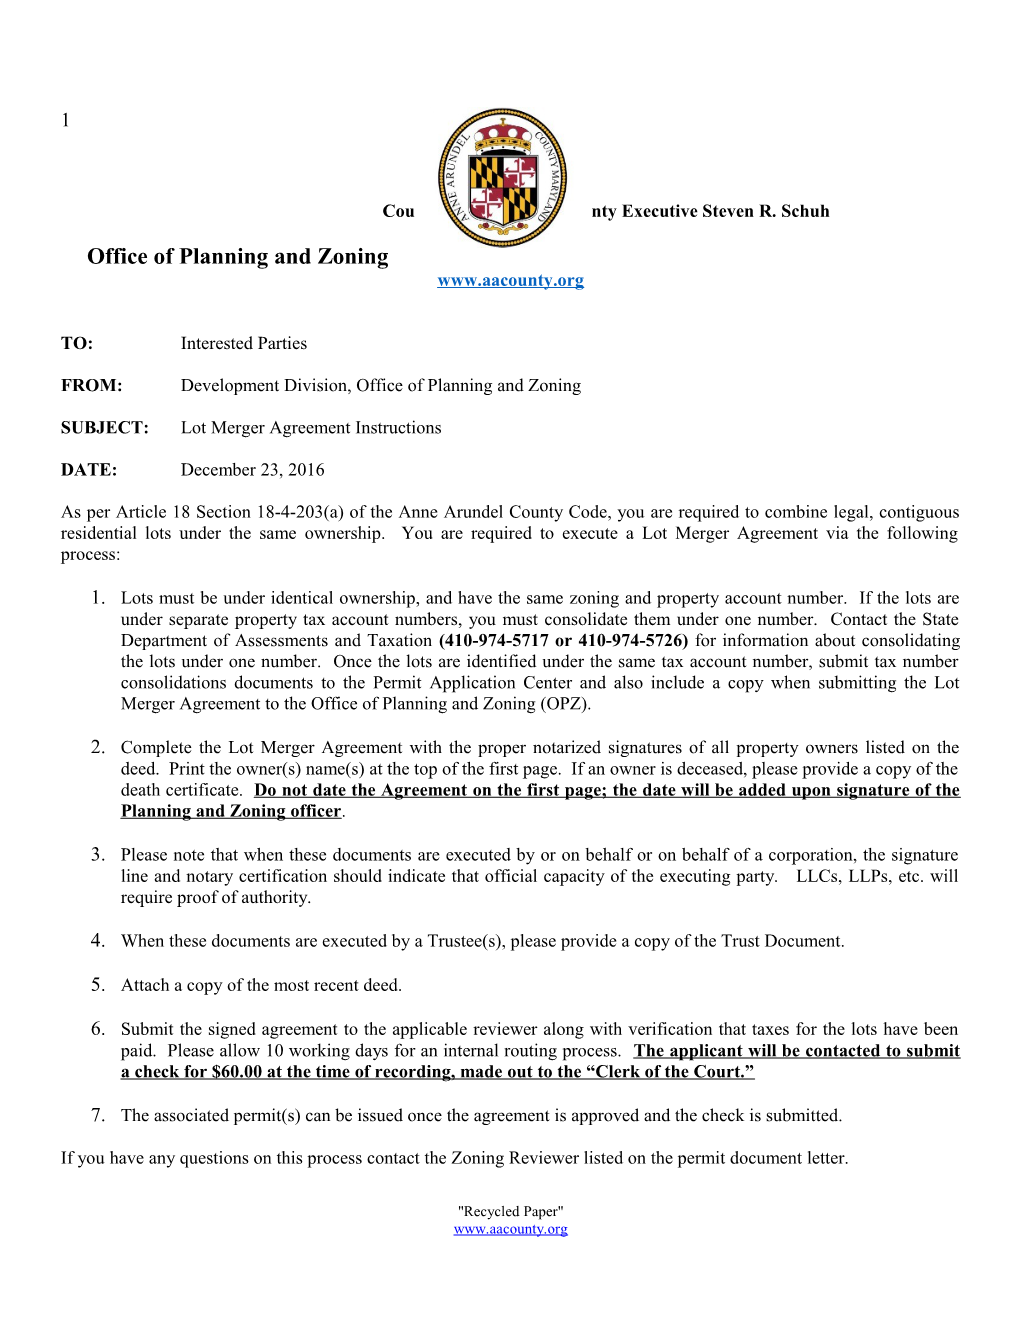 Office of Planning and Zoning